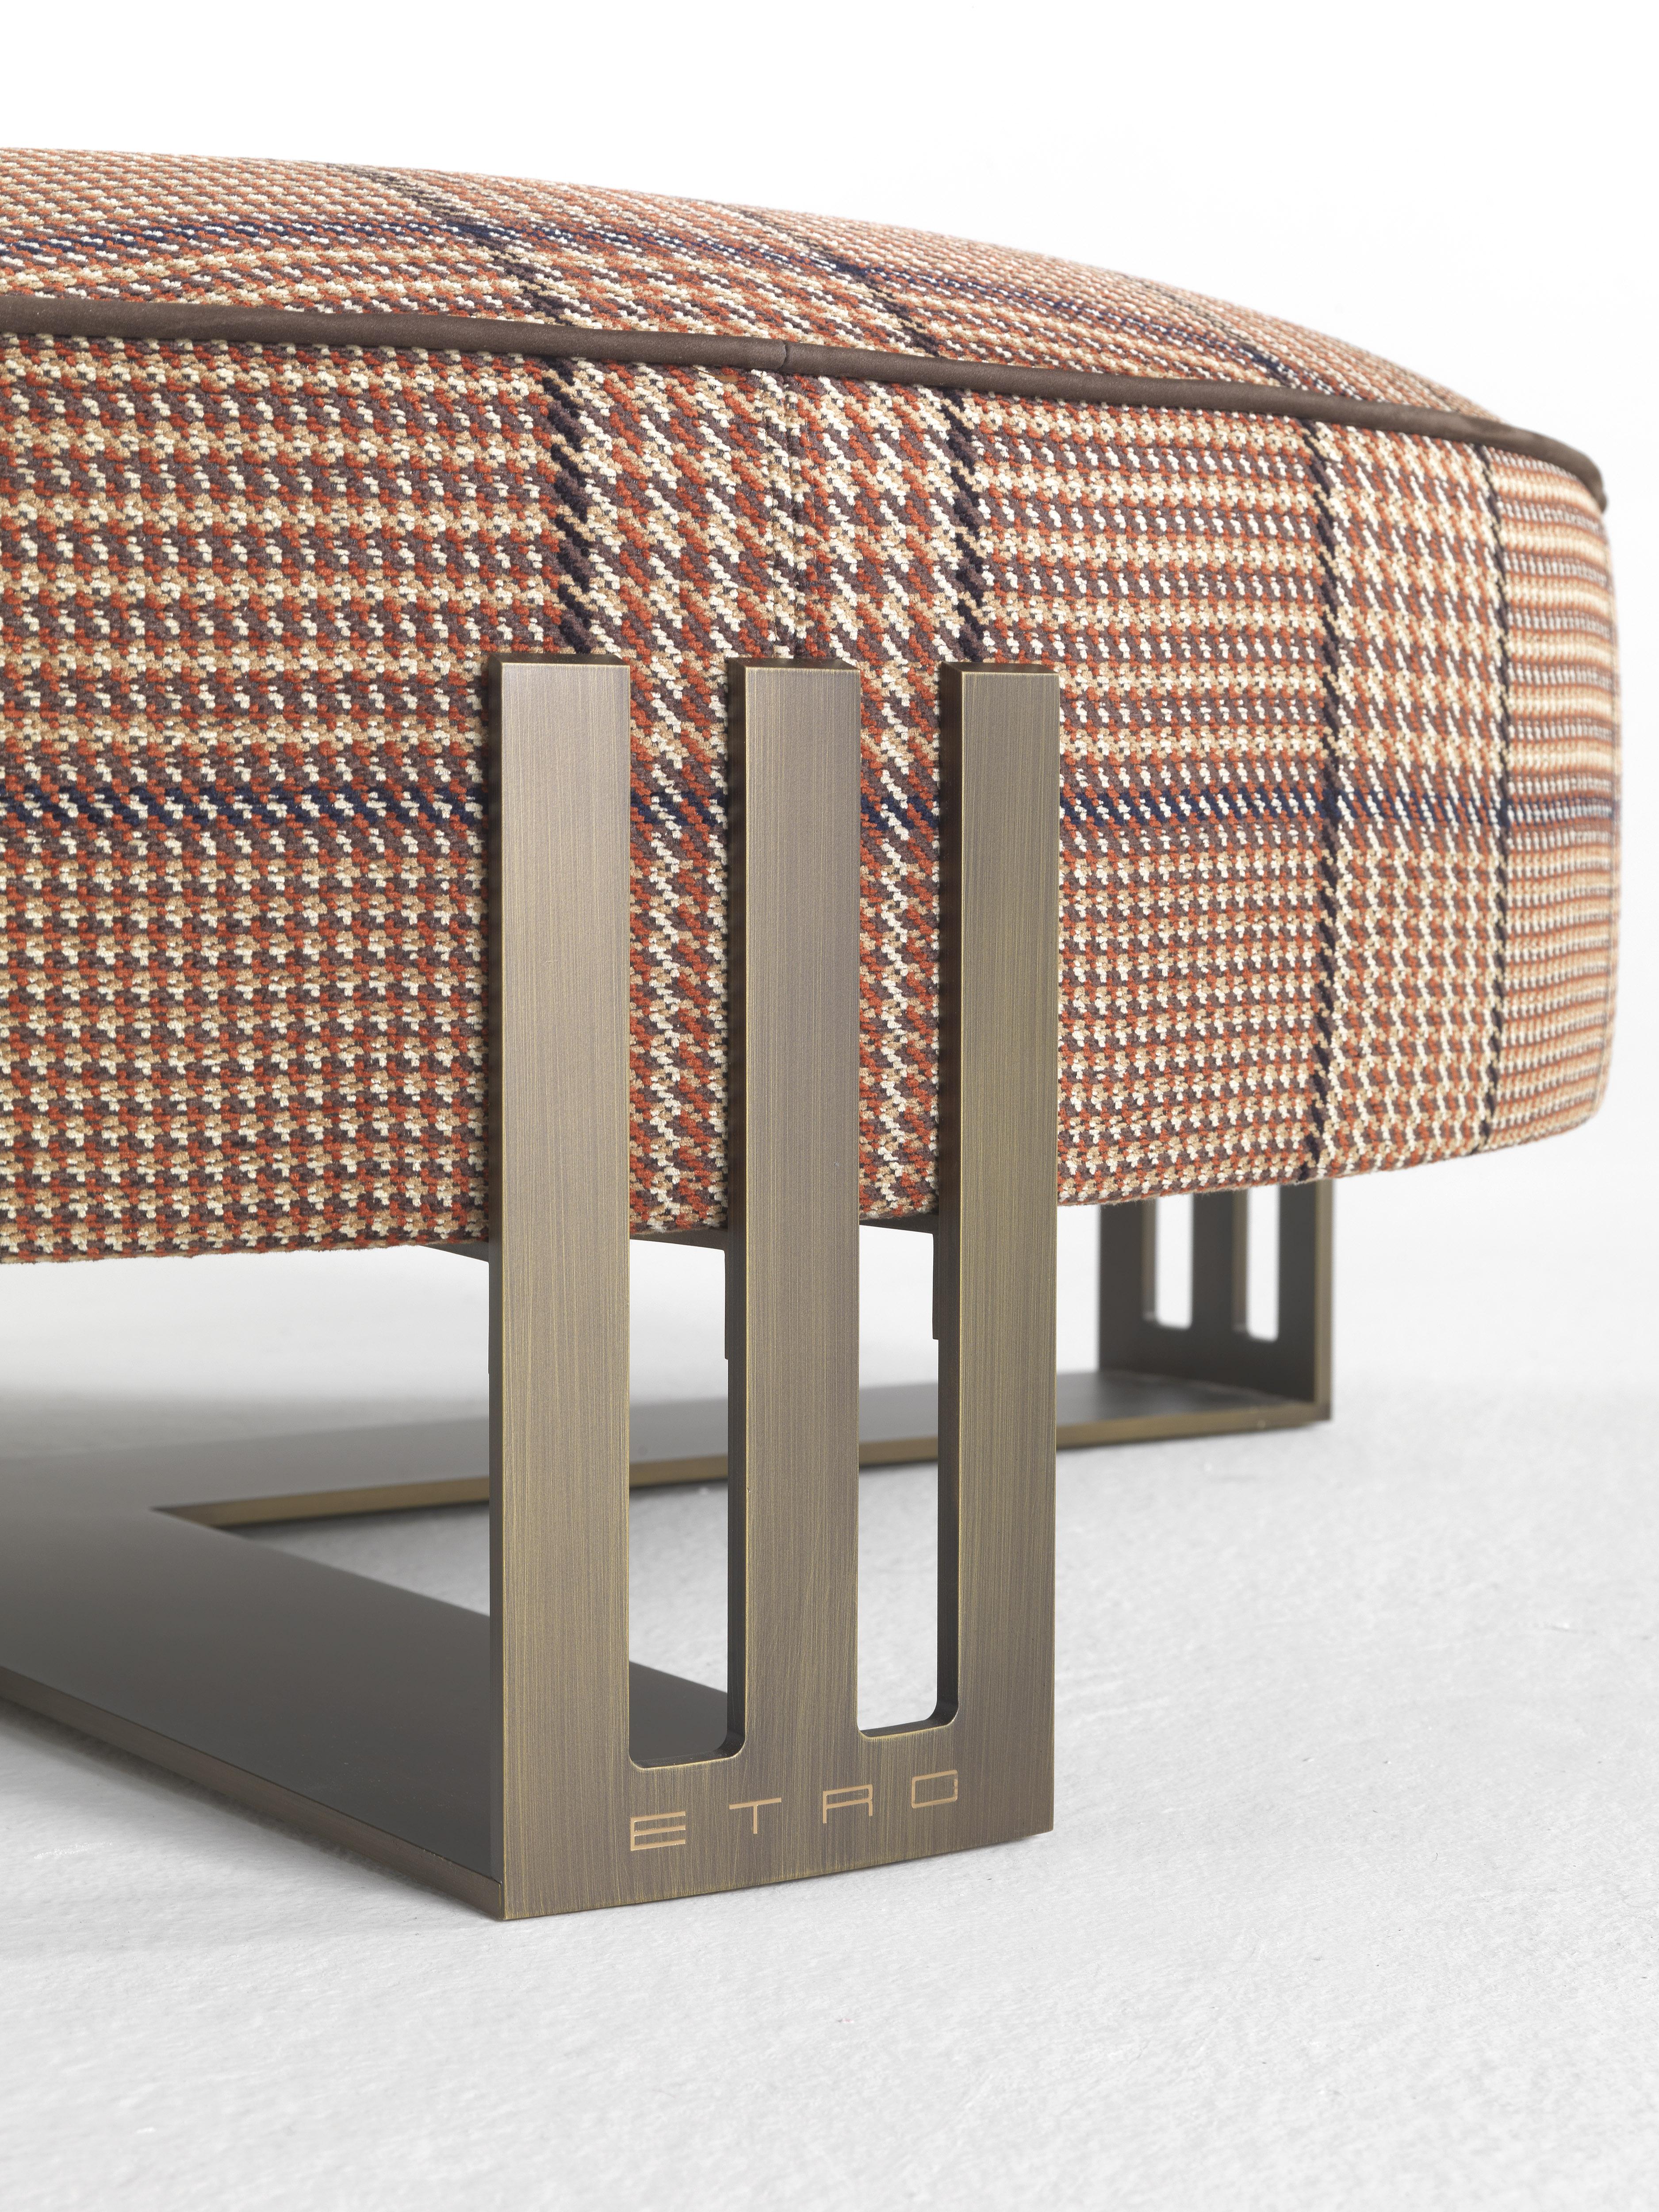 Versatile and compact, the Klee pouf is a superb mix of elements in a perfect Etro Home Interiors style. The upholstery in typical fabrics of the collection, combined with the refinement of the metal structure with shape inspired by the Etro’s logo